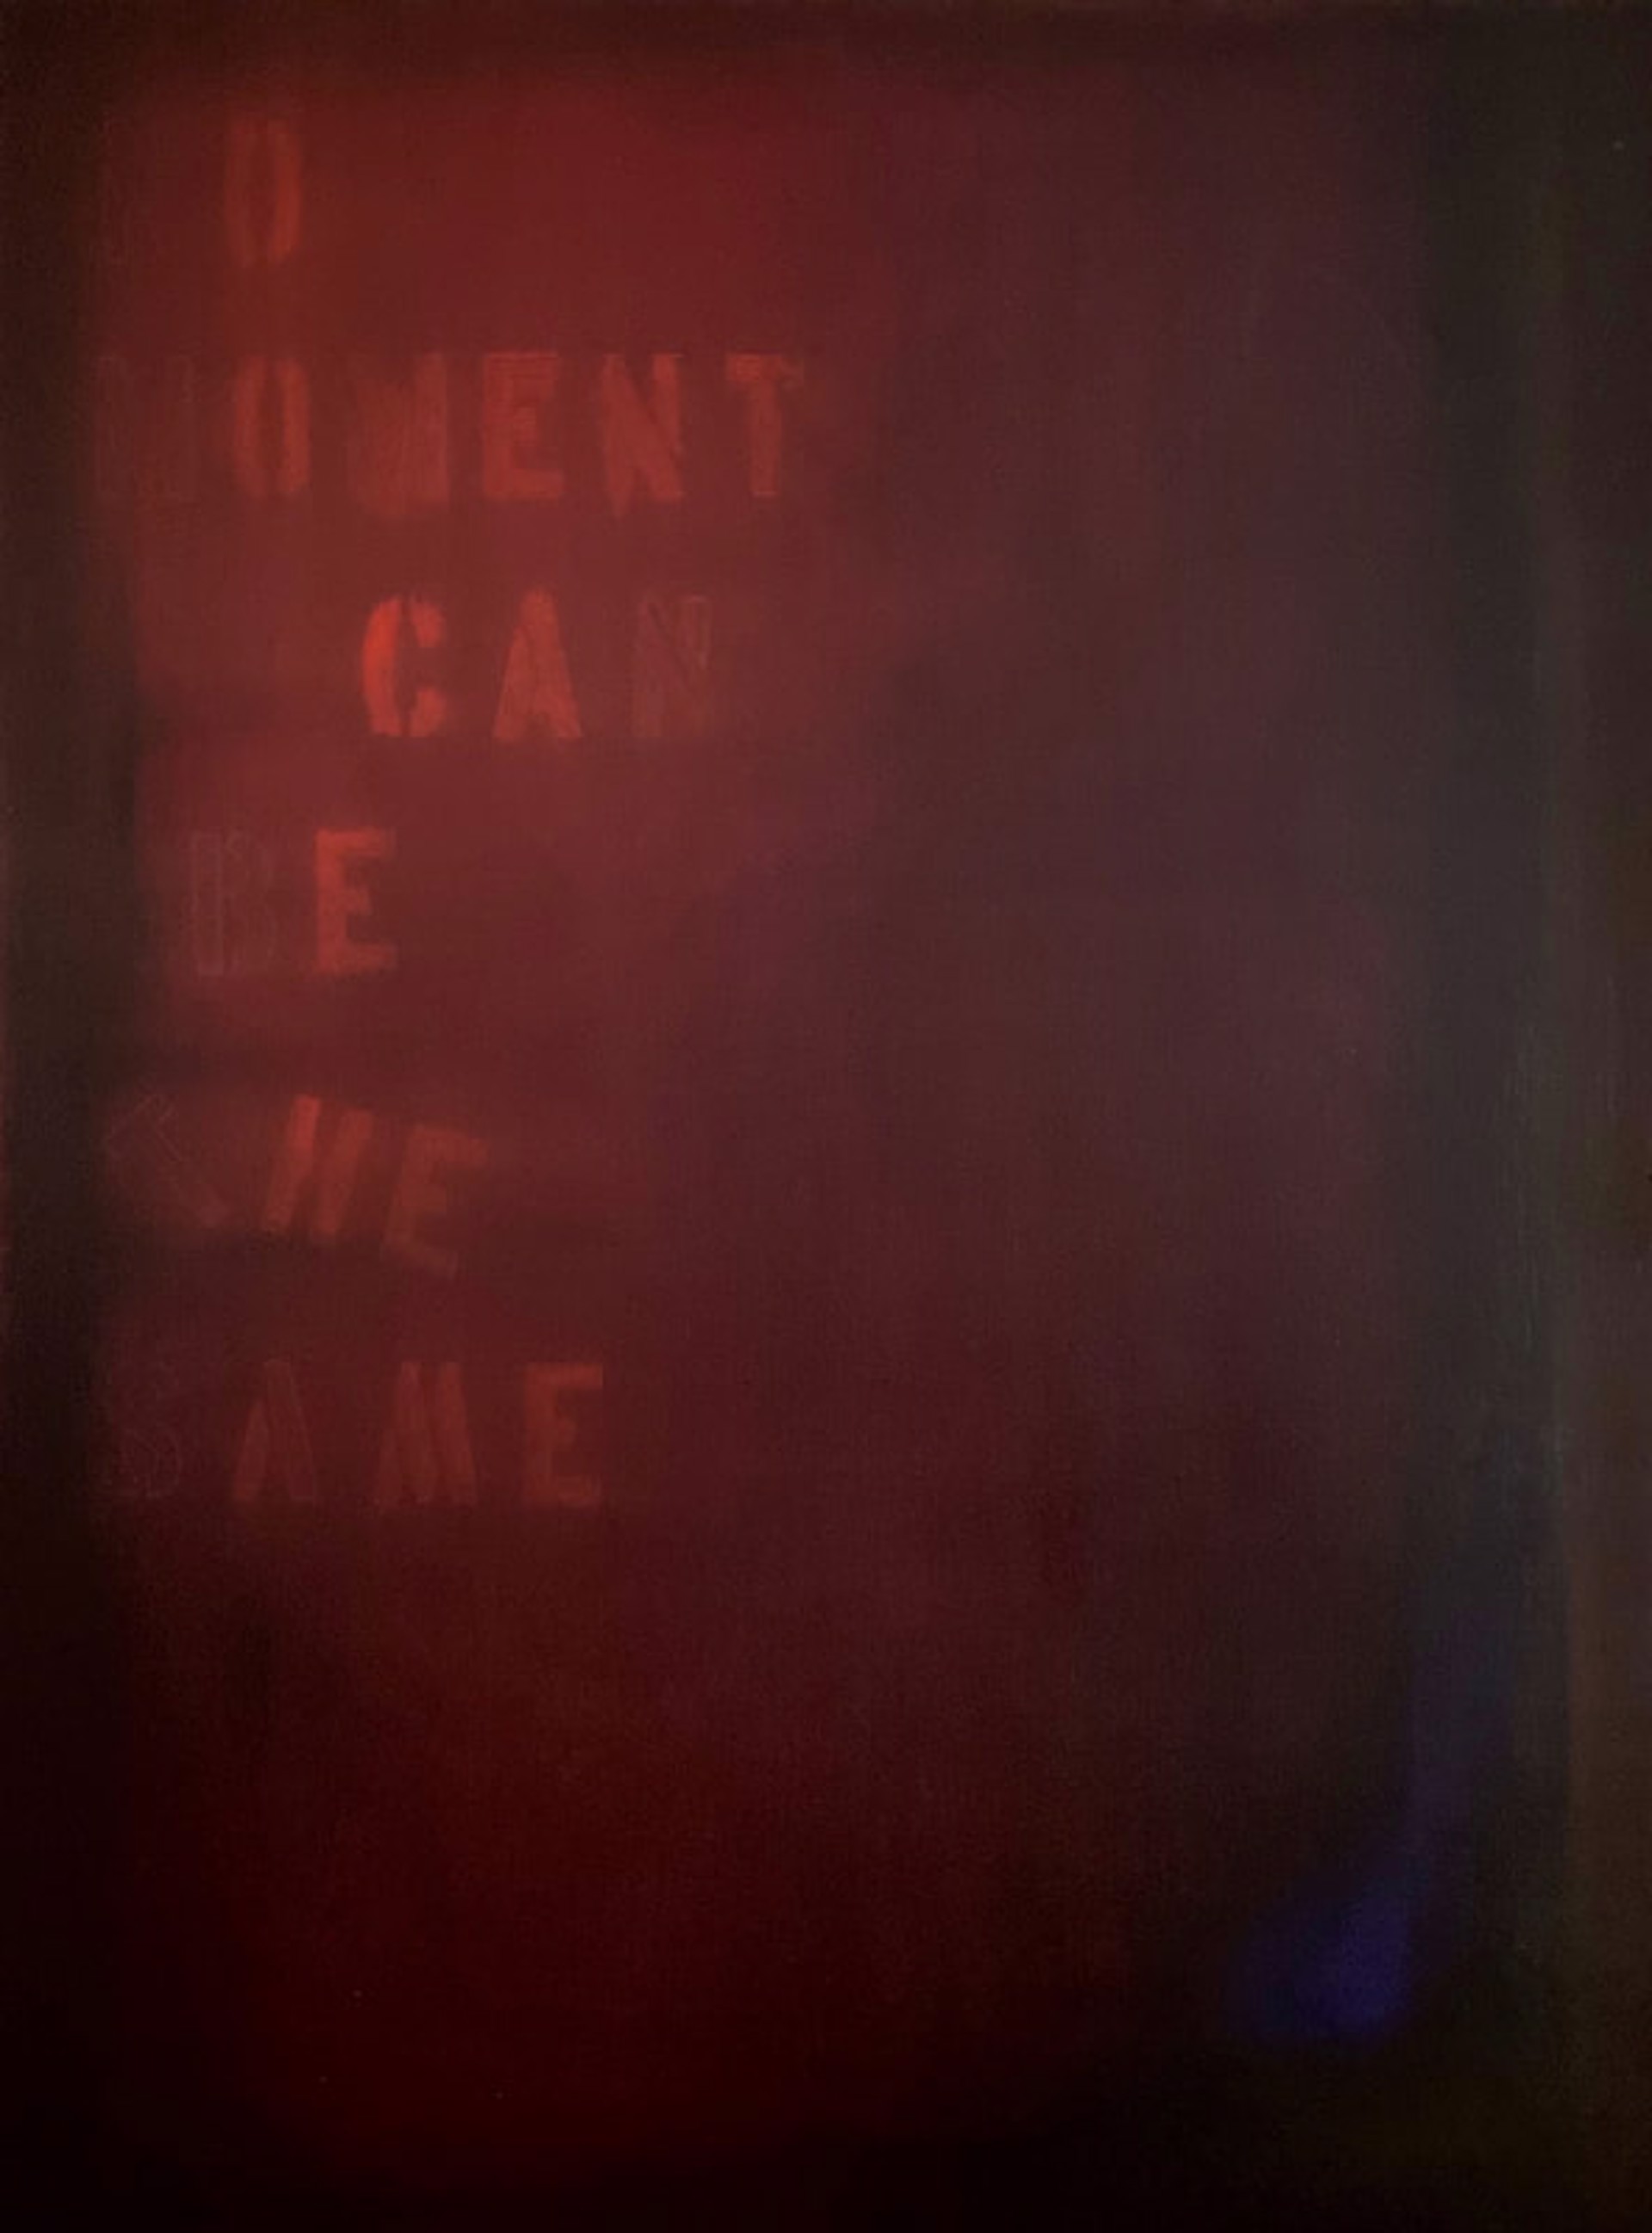 A Moment Can't Be the Same by Todd Williamson